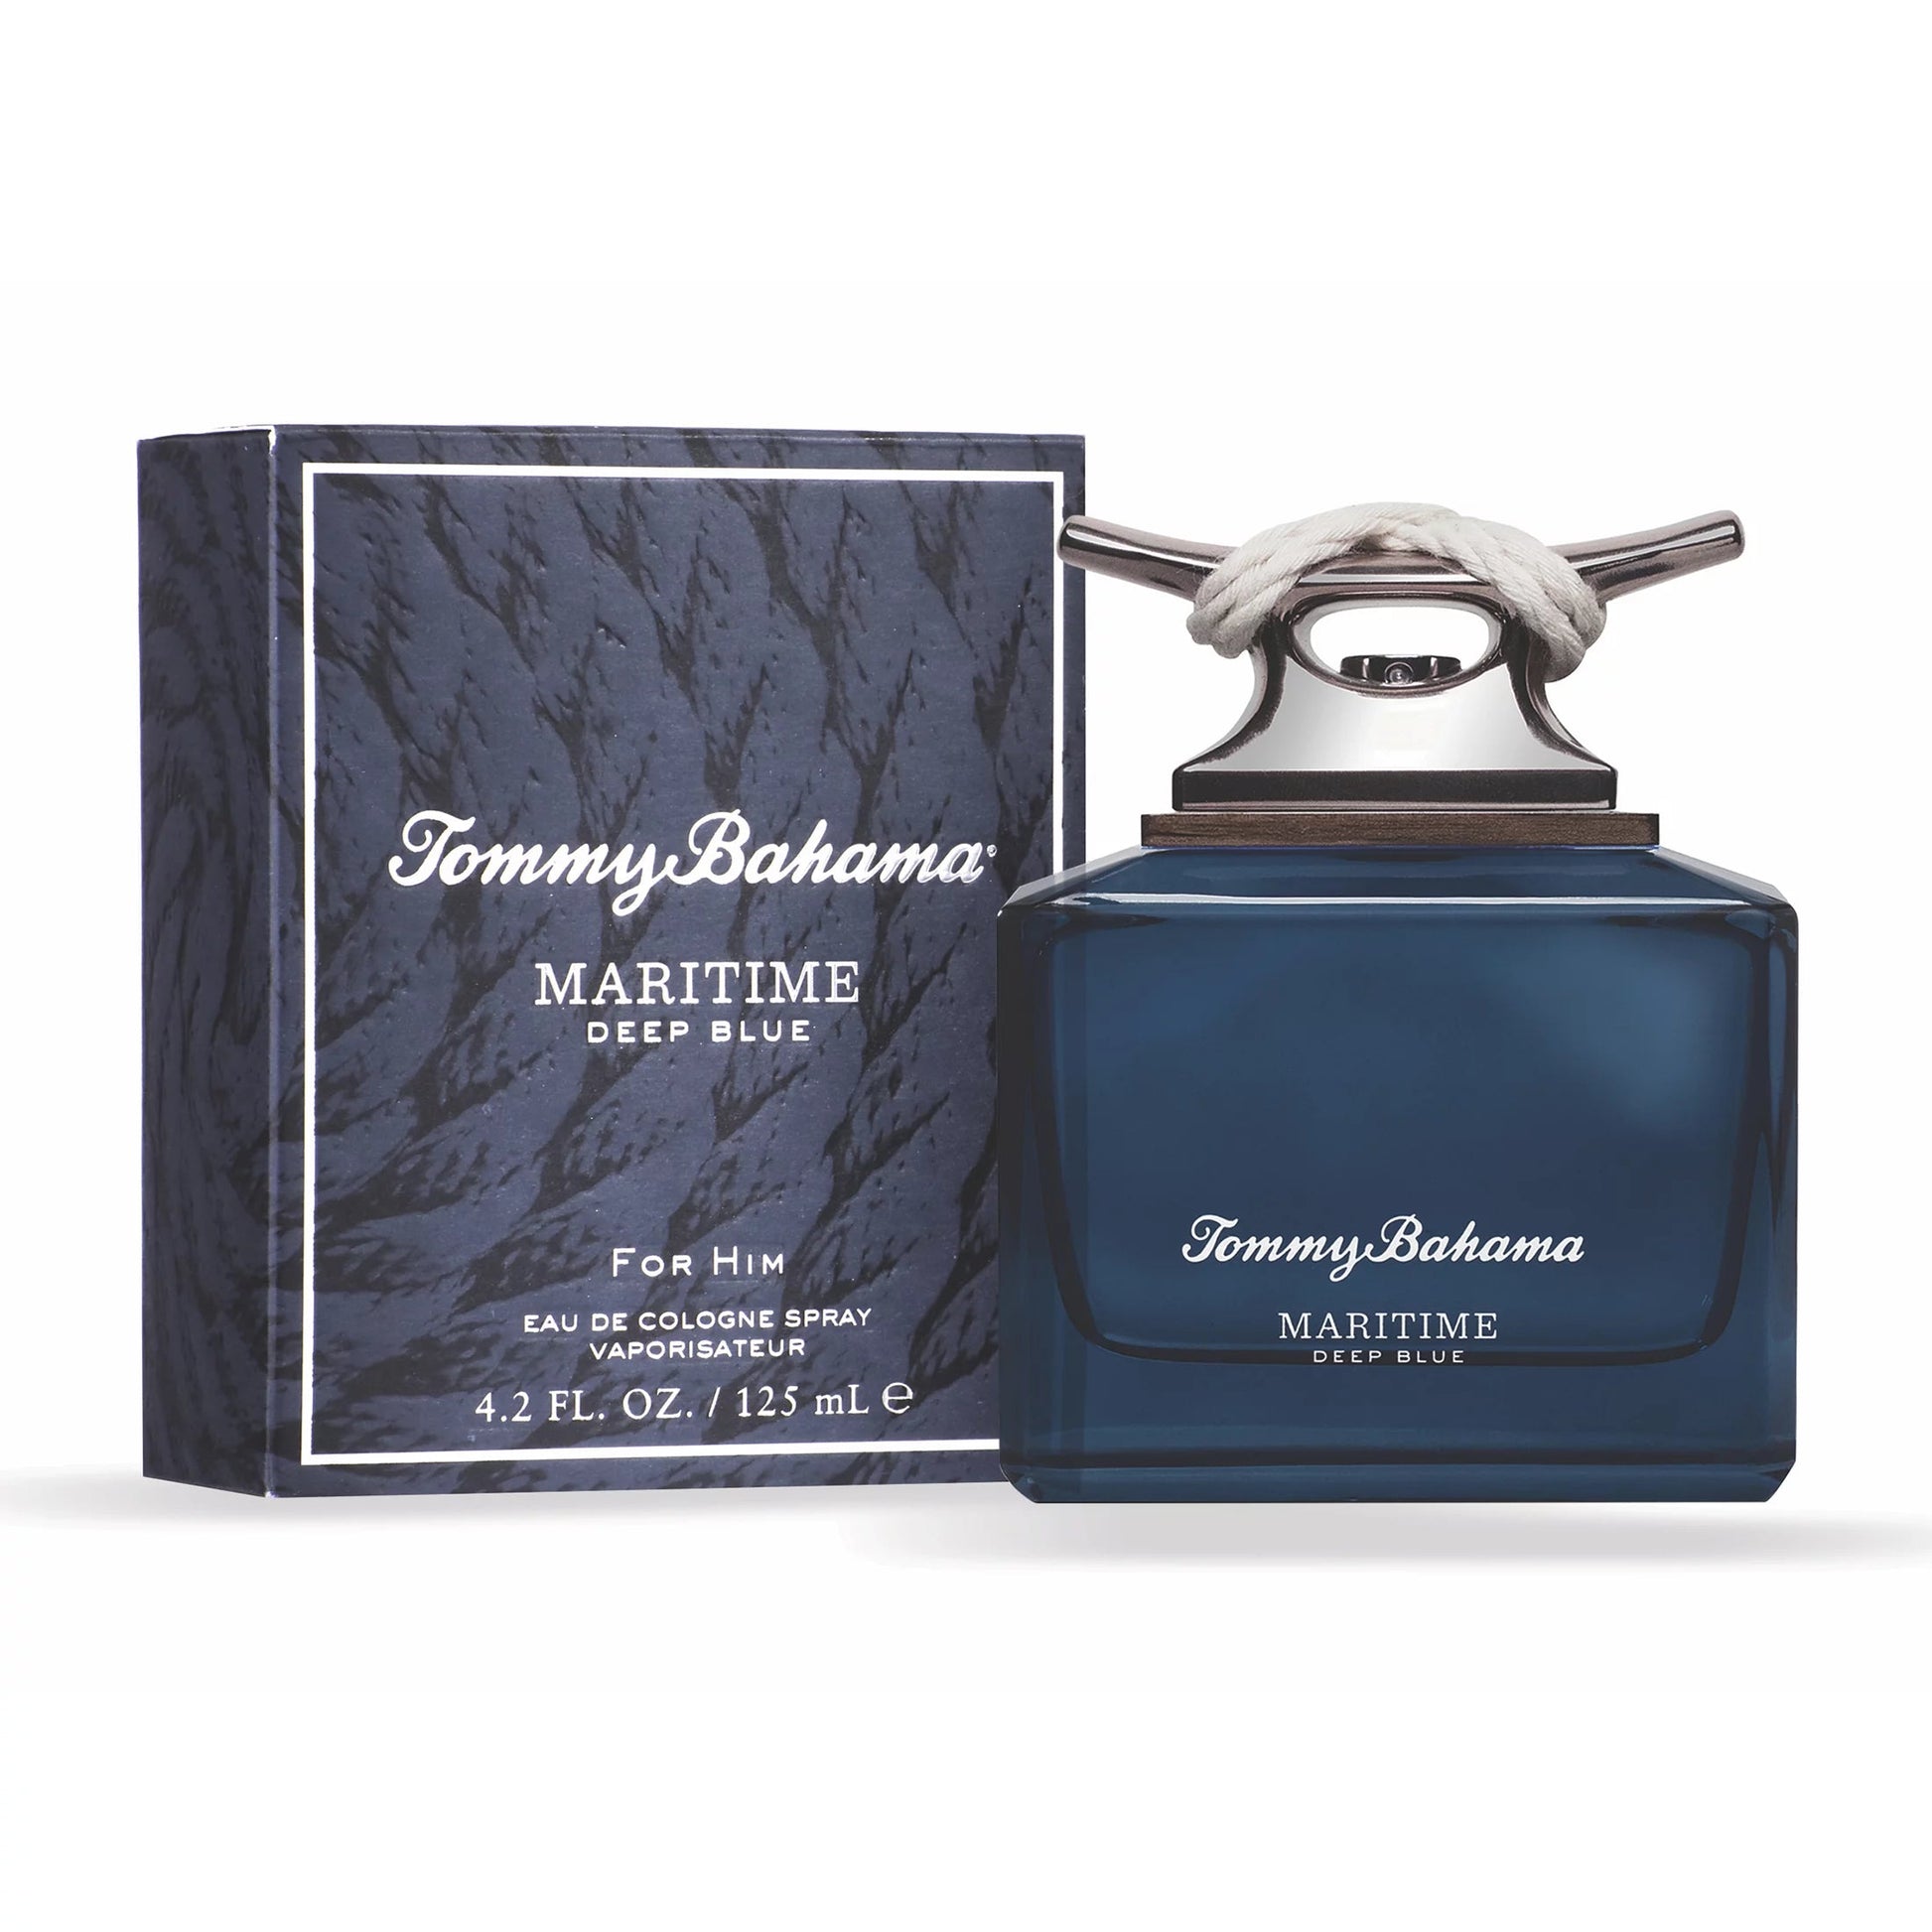 Maritime Deep Blue Eau Cologne Spray for Men by Tommy Bahama, Product image 1